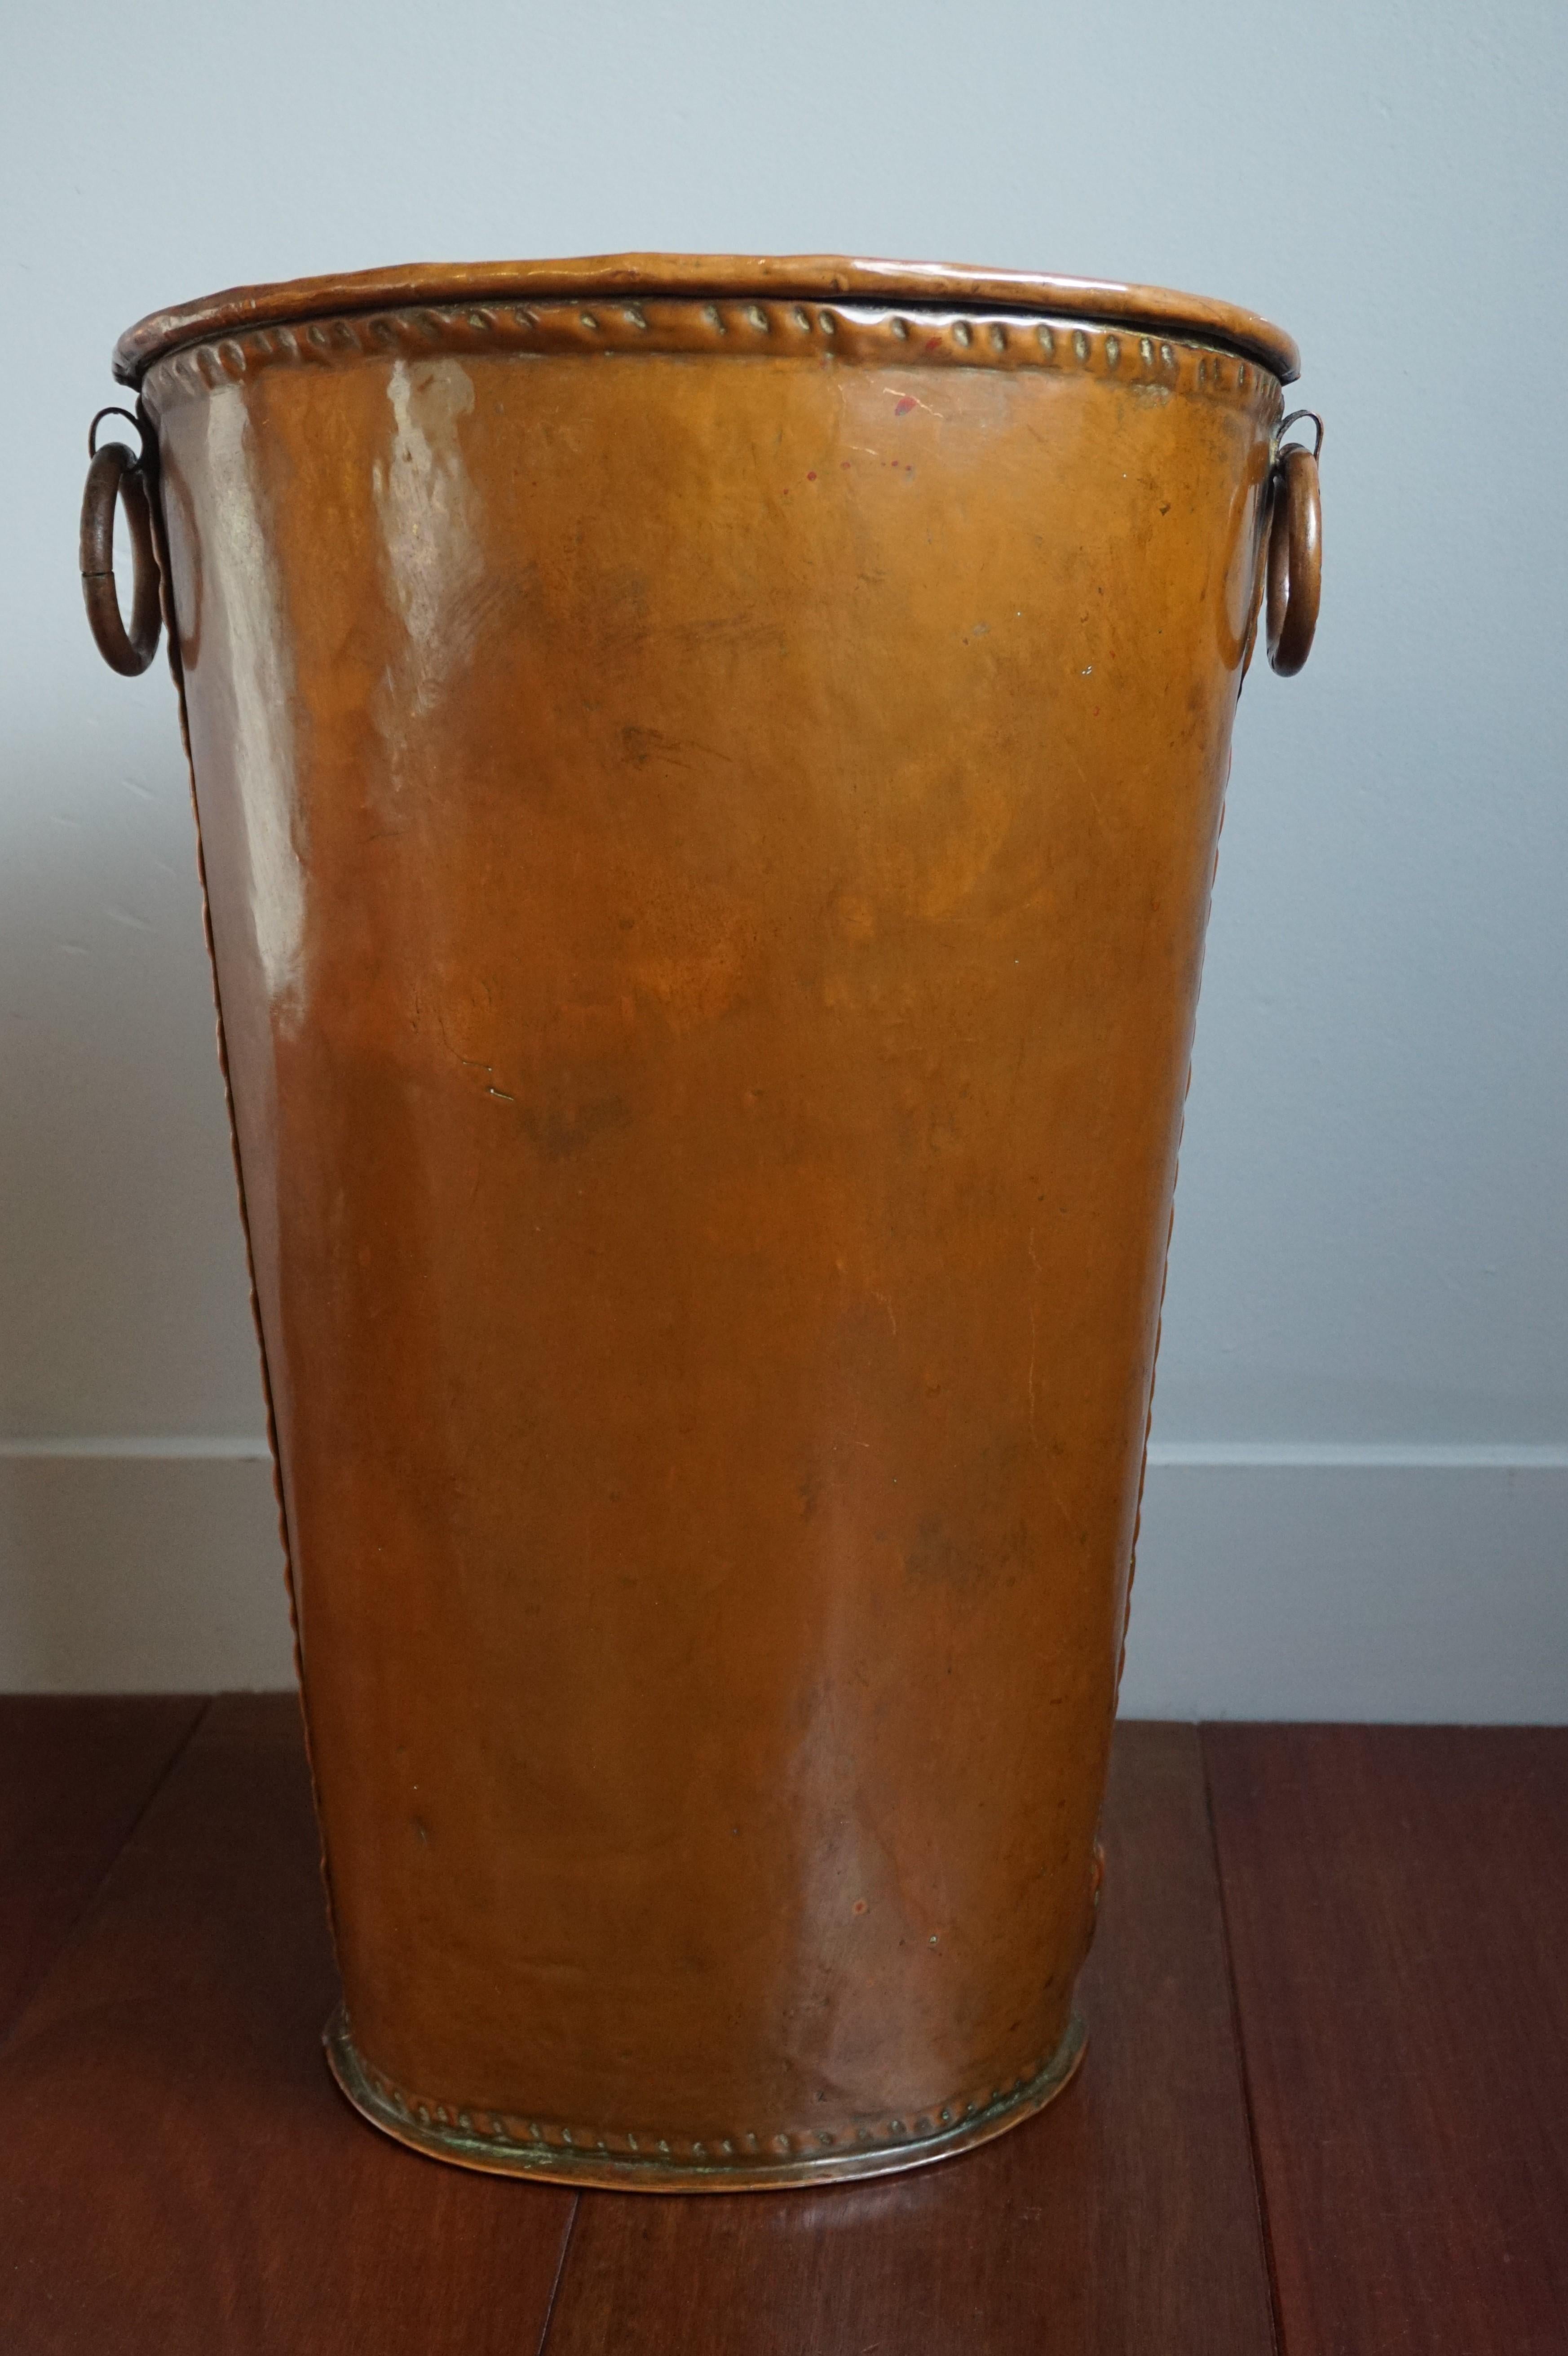 Late 1800s Handcrafted Copper Umbrella Stand Resembling Ancient Leather Bucket For Sale 6